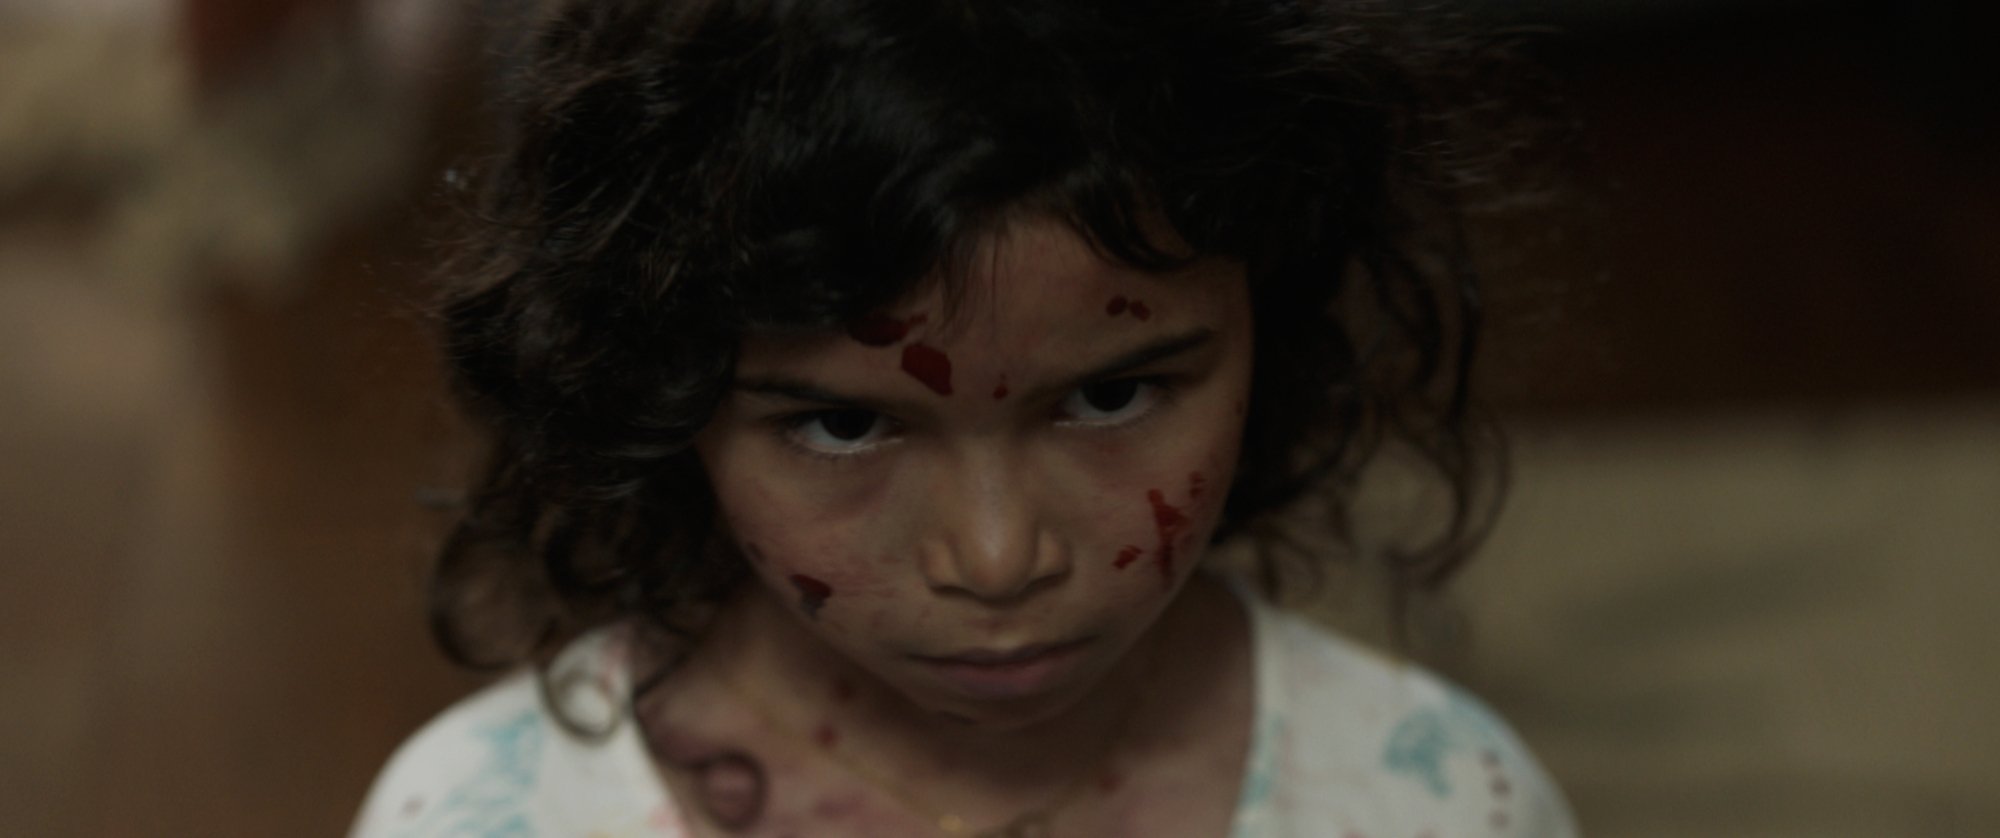 ‘Birth/Rebirth’ movie review [Sundance 2023]: Revival Horror with a touch of motherhood